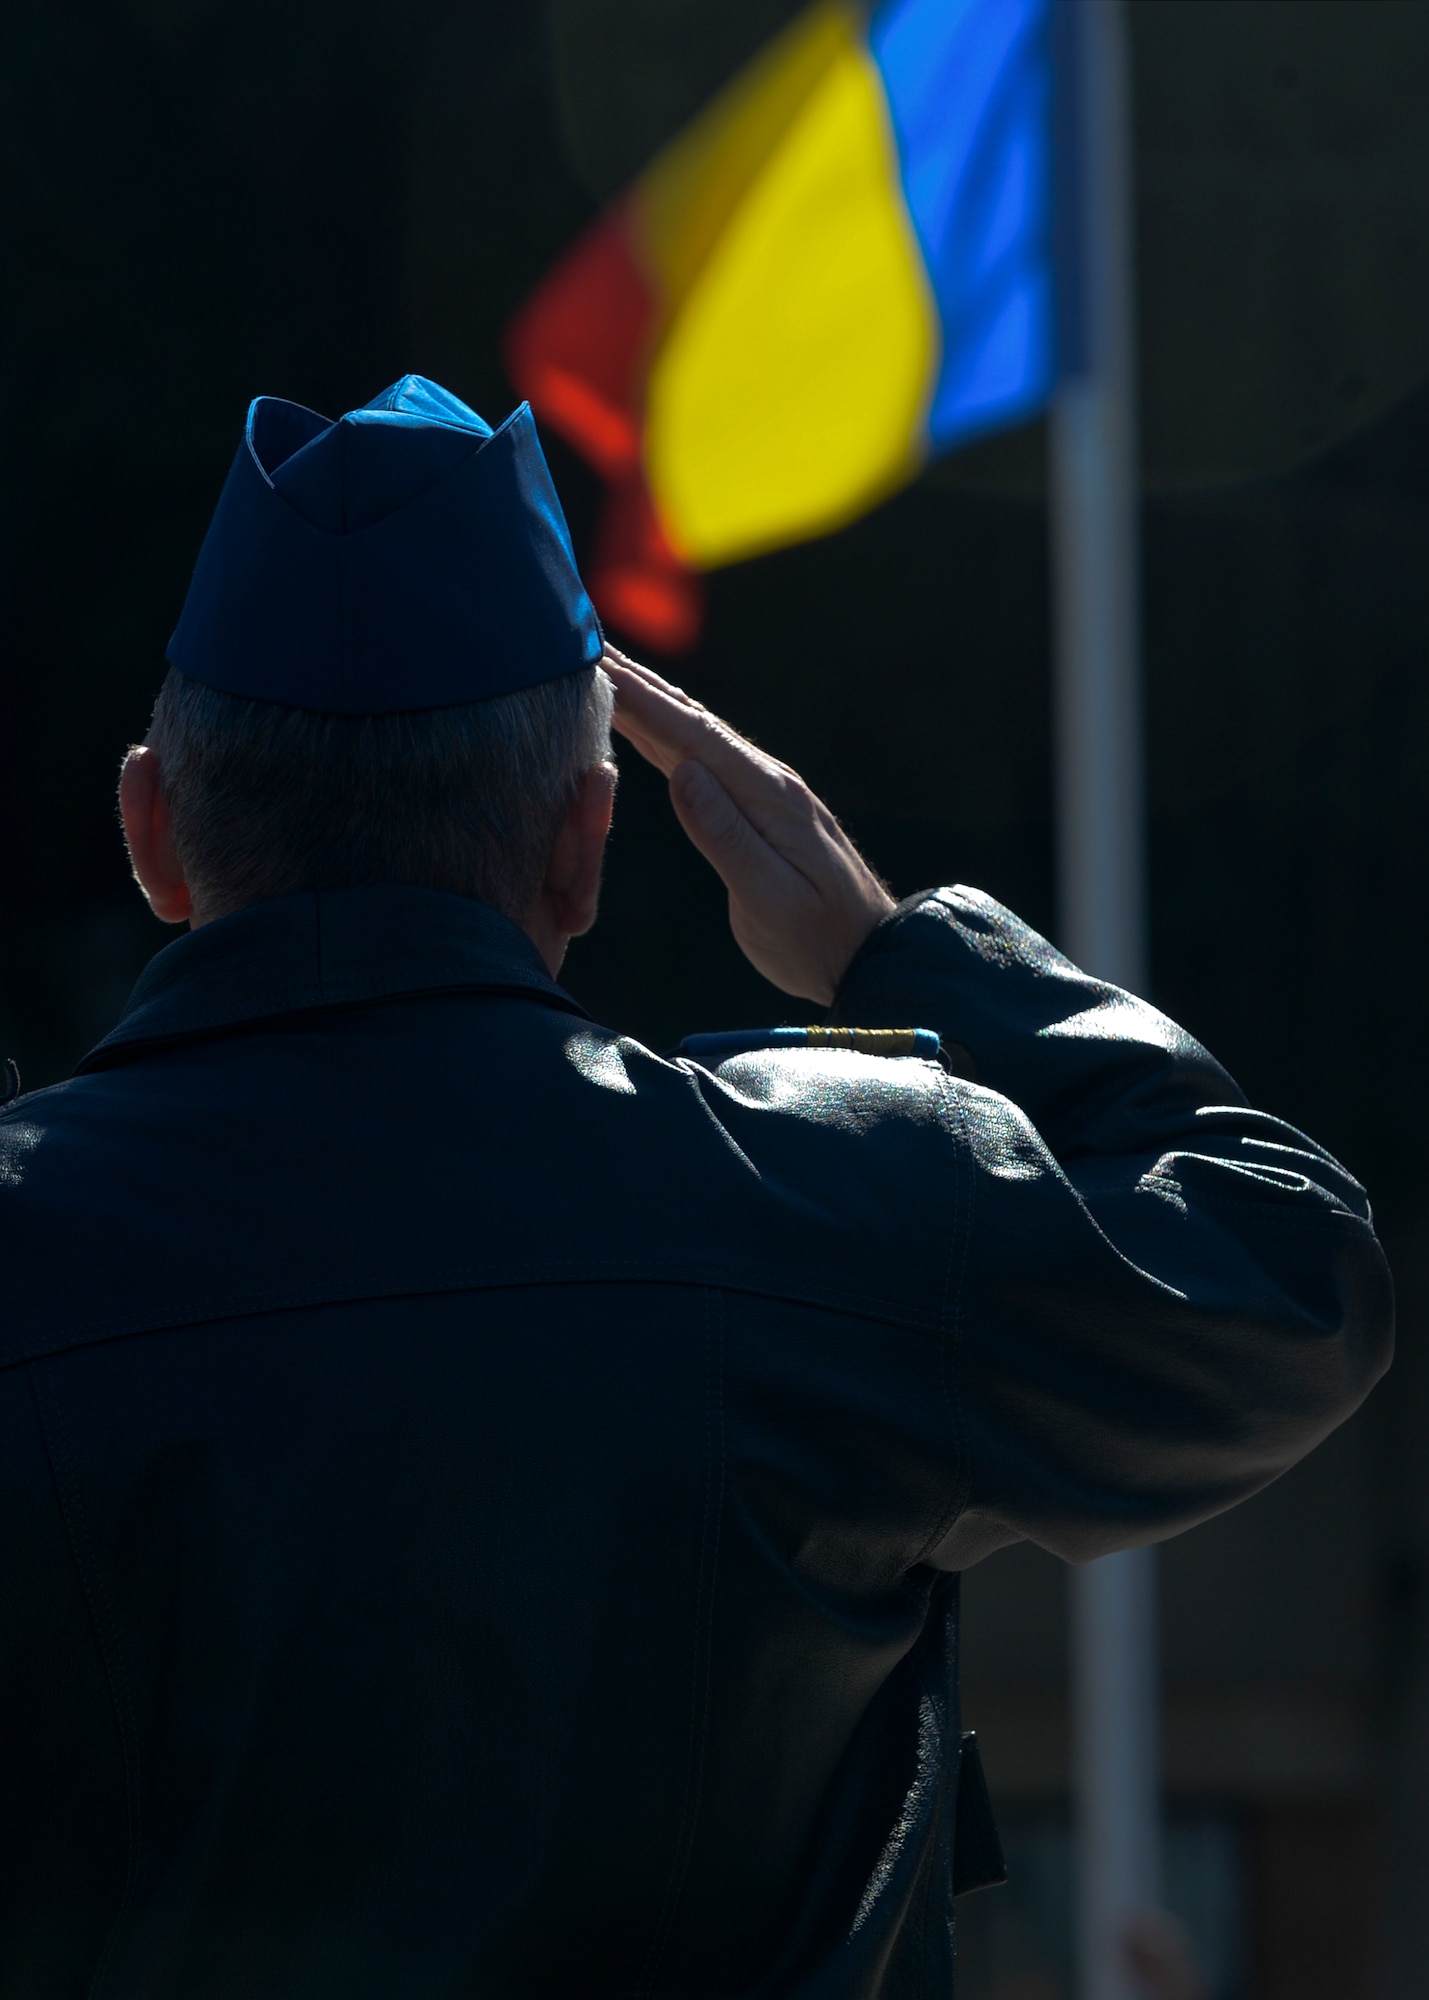 Romanian air force Capt. Cmdr. Caline Hulea, a MiG-21 aircraft pilot assigned to the 711th Fighter Squadron, salutes the raising of the Romanian flag during the opening ceremony of Dacian Thunder 2015 at Campia Turzii, Romania, April 1, 2015. The U.S. and Romanian air forces will conduct training aimed to strengthen interoperability and demonstrate the countries' shared commitment to the security and stability of Europe.  (U.S. Air Force photo by Staff Sgt. Joe W. McFadden/Released)